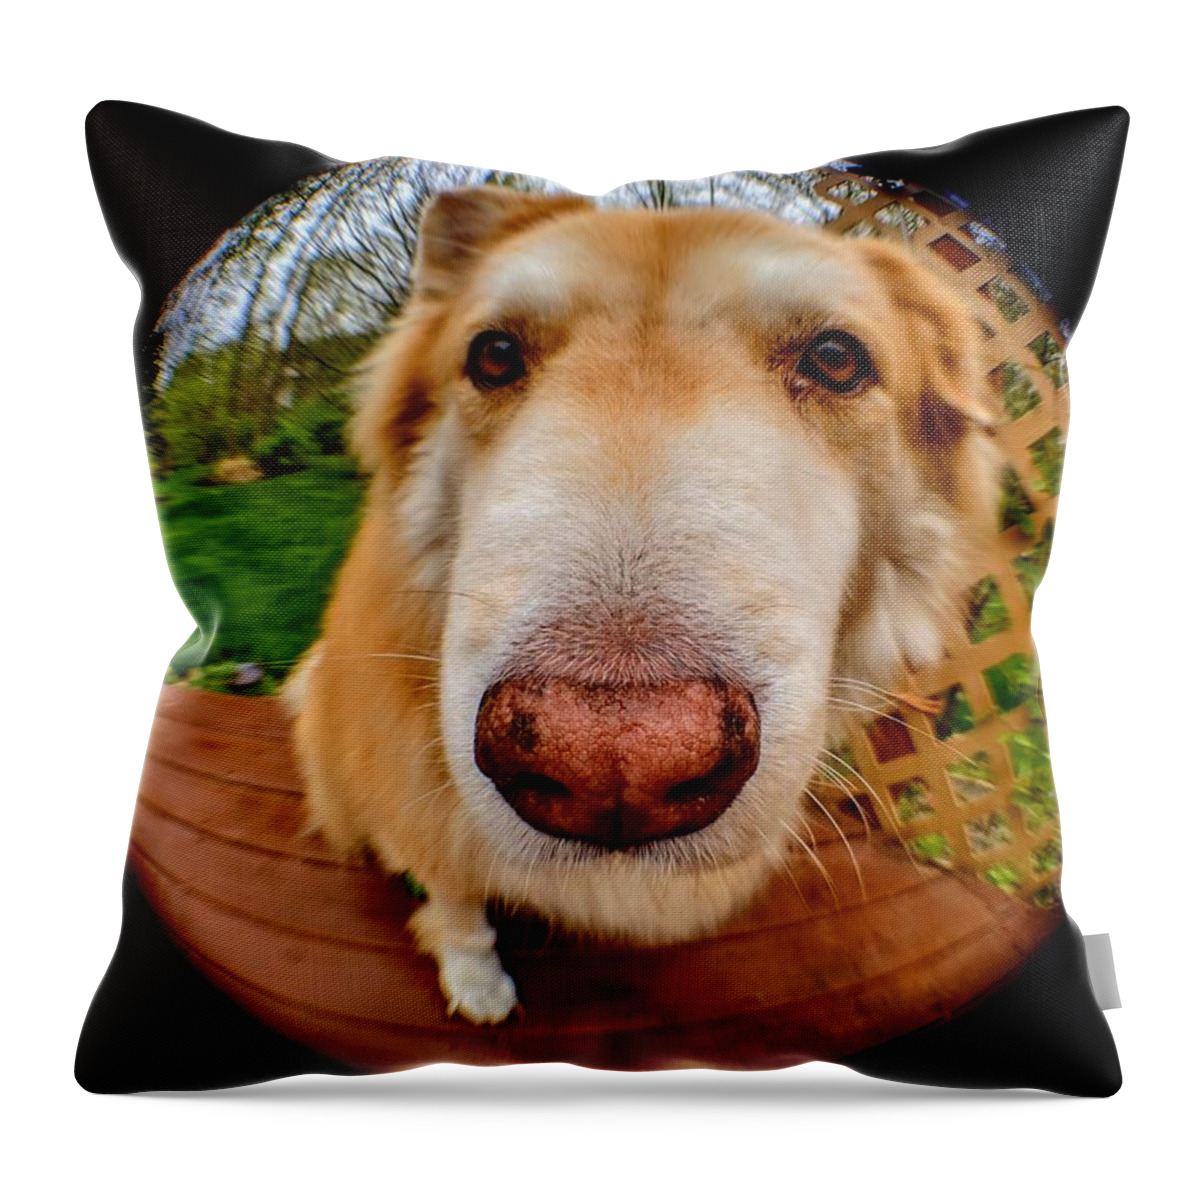  Throw Pillow featuring the photograph Extreme Closeup by Brad Nellis